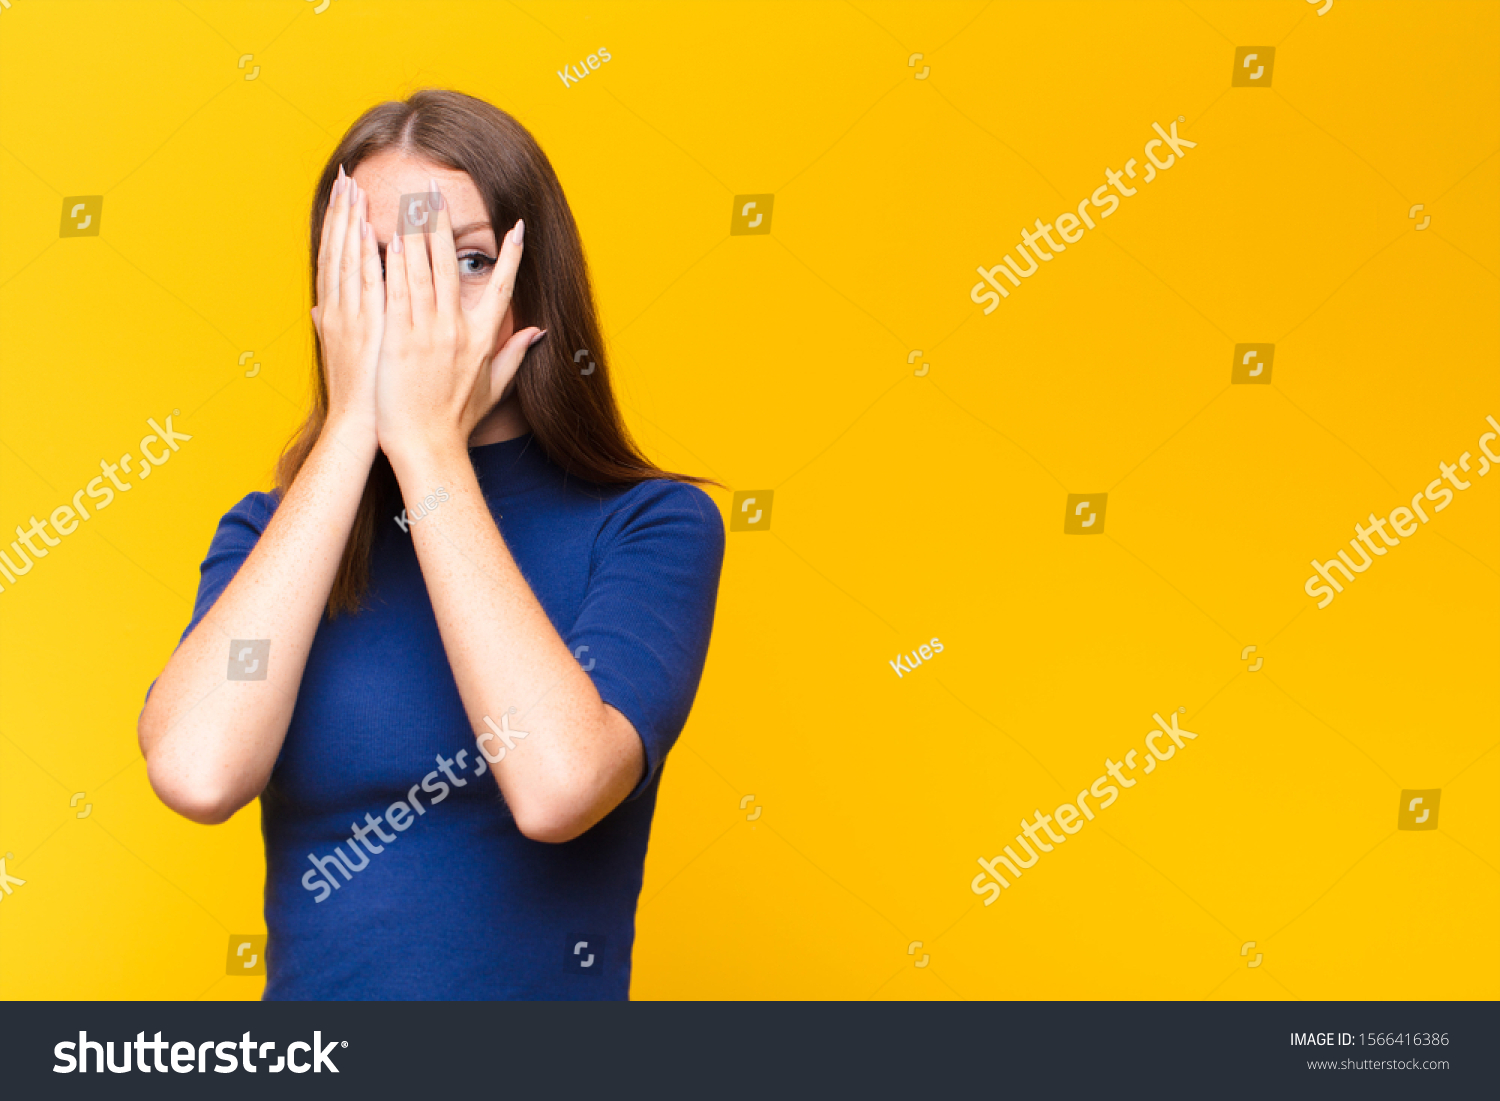 young red head woman covering face with hands, peeking between fingers with surprised expression and looking to the side against flat wall #1566416386